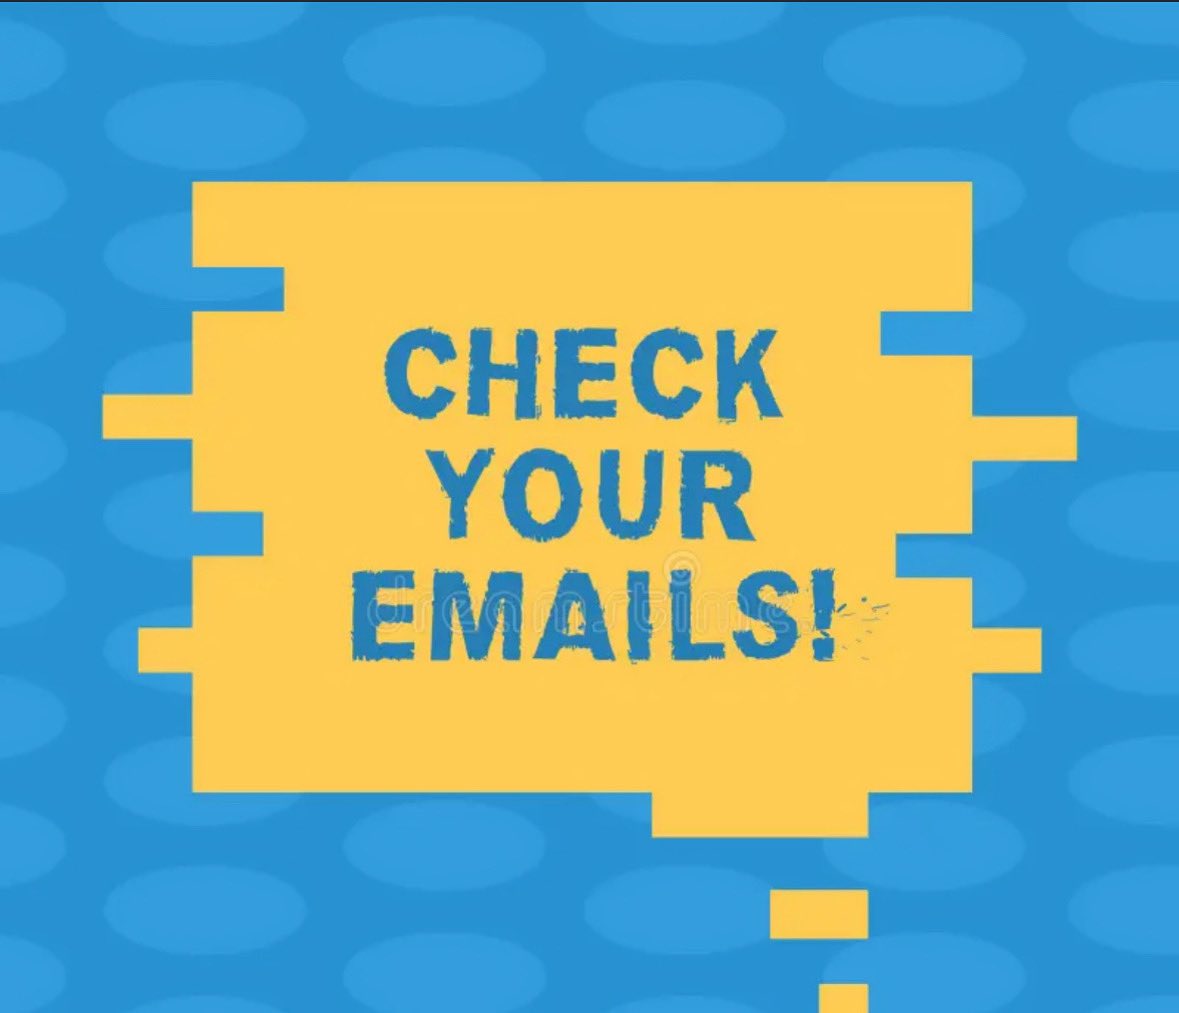 SCTA members - please check your personal email regarding important budget information.